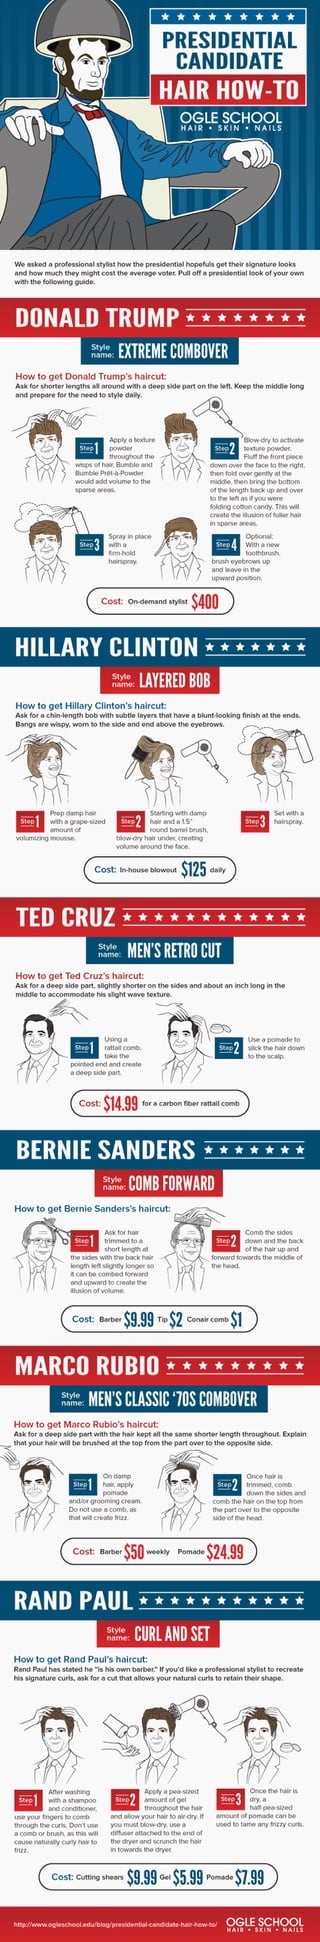 Hair Style How-To by Presidential Candidates